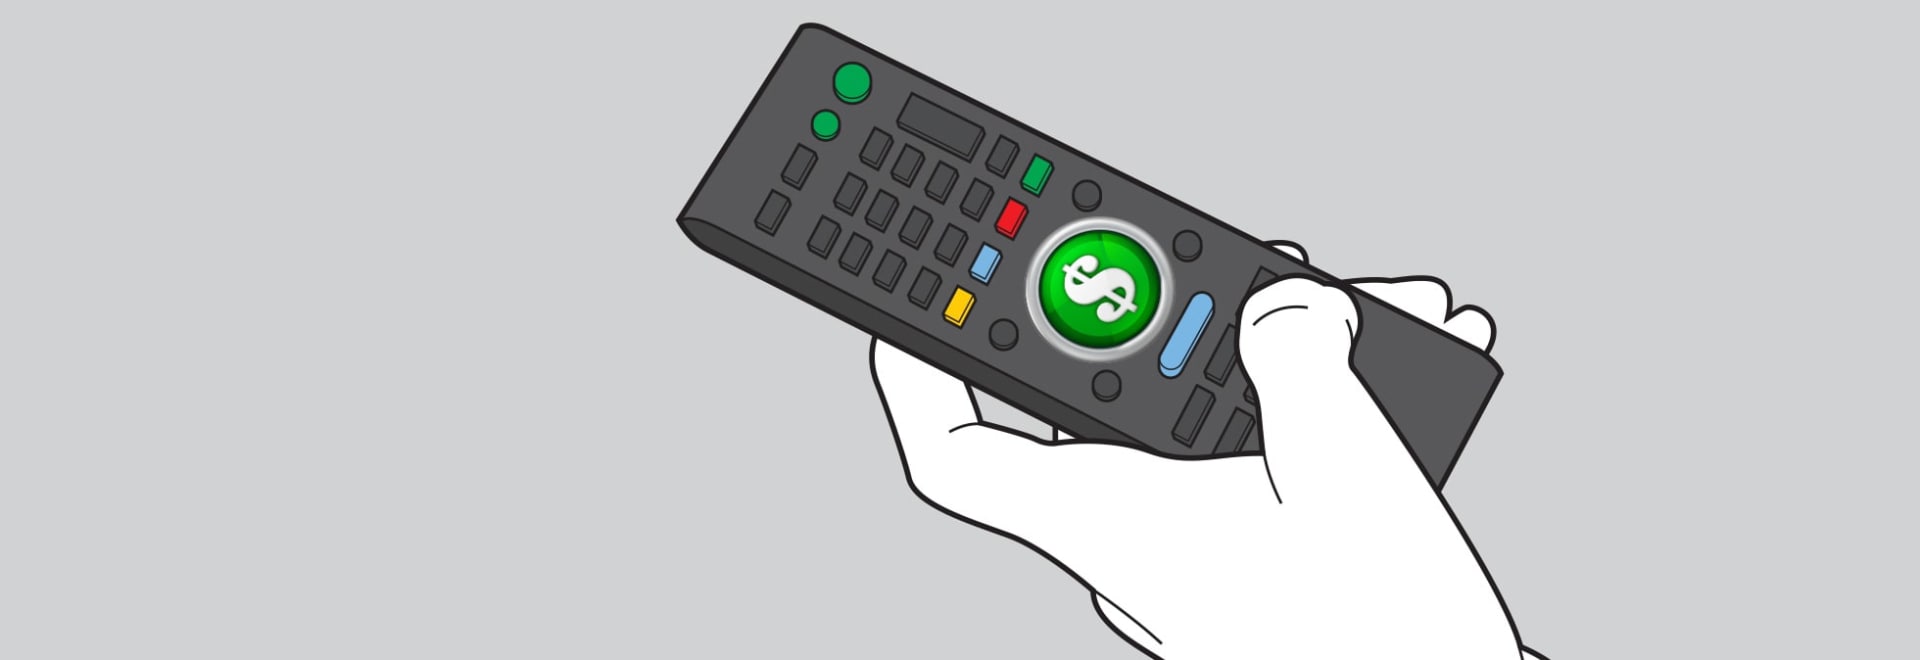 An illustration of a TV remote for an article on money-saving tech tips